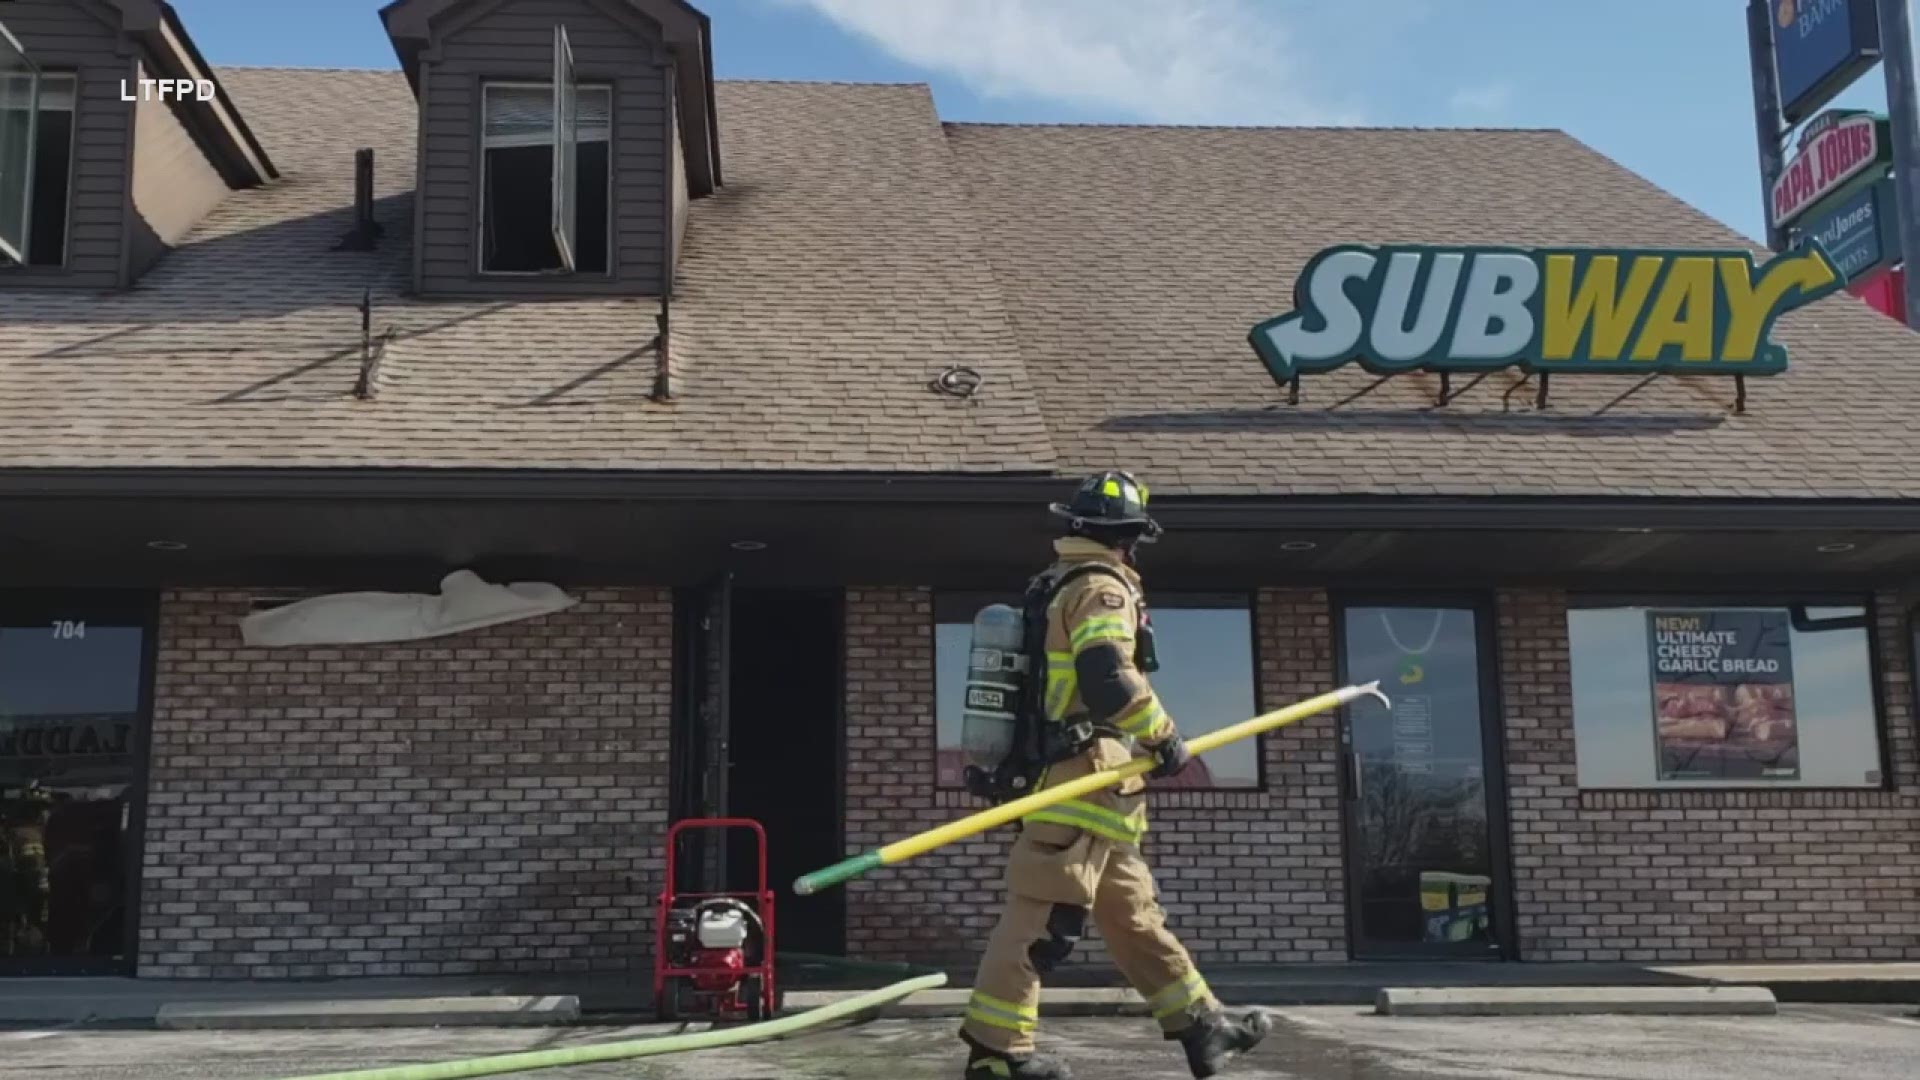 Firefighters responded to reports of smoke at a business in Indiana. Thankfully, a quick call and the work of the first responders kept the damage minimal.